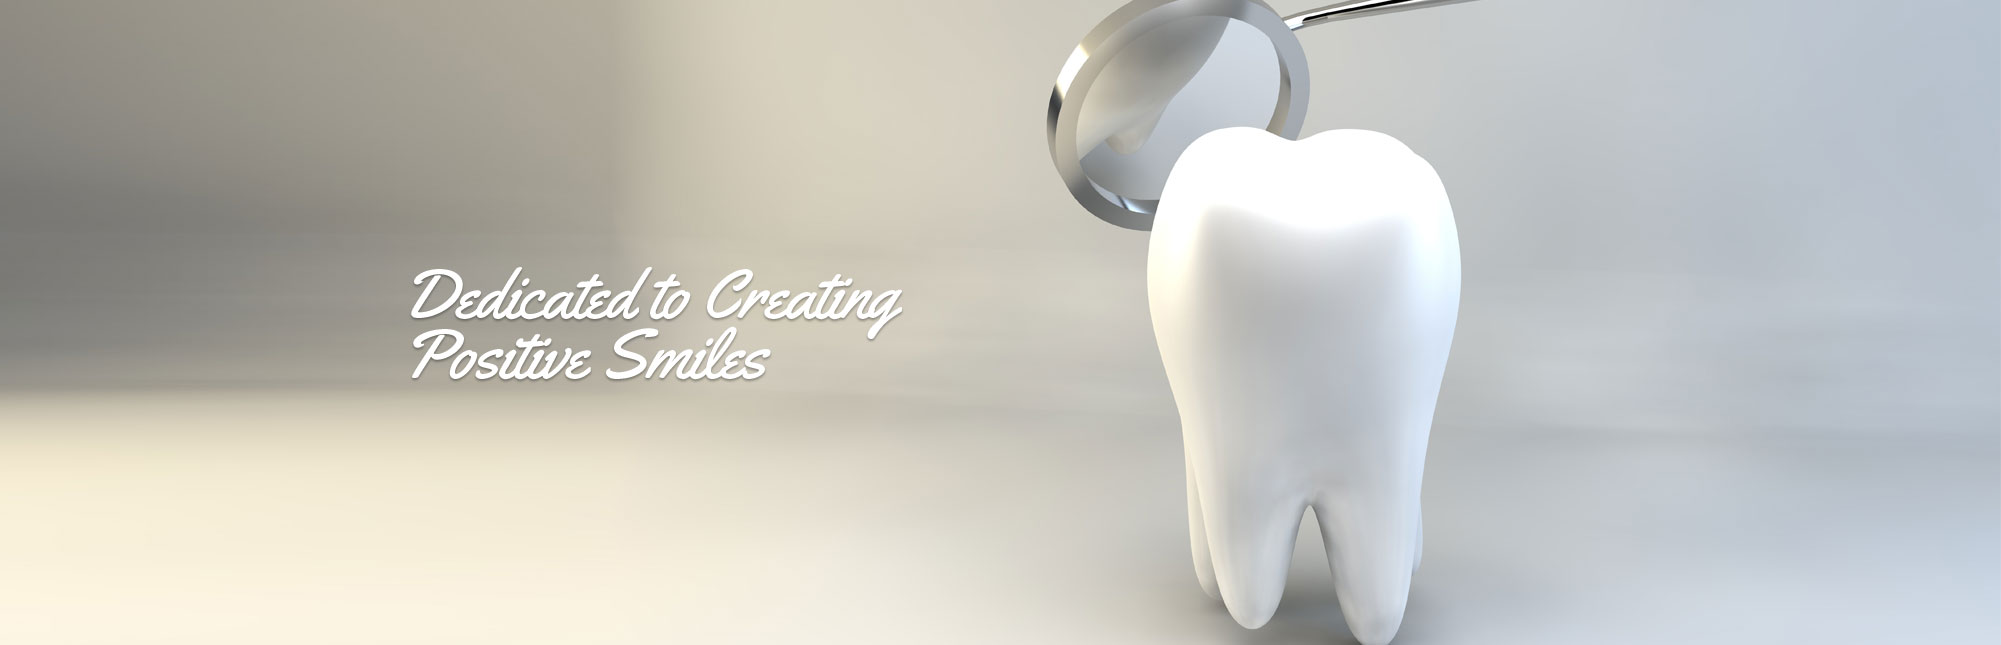 Single Tooth and Dental Mirror - Dedicated to Creating Positive Smiles